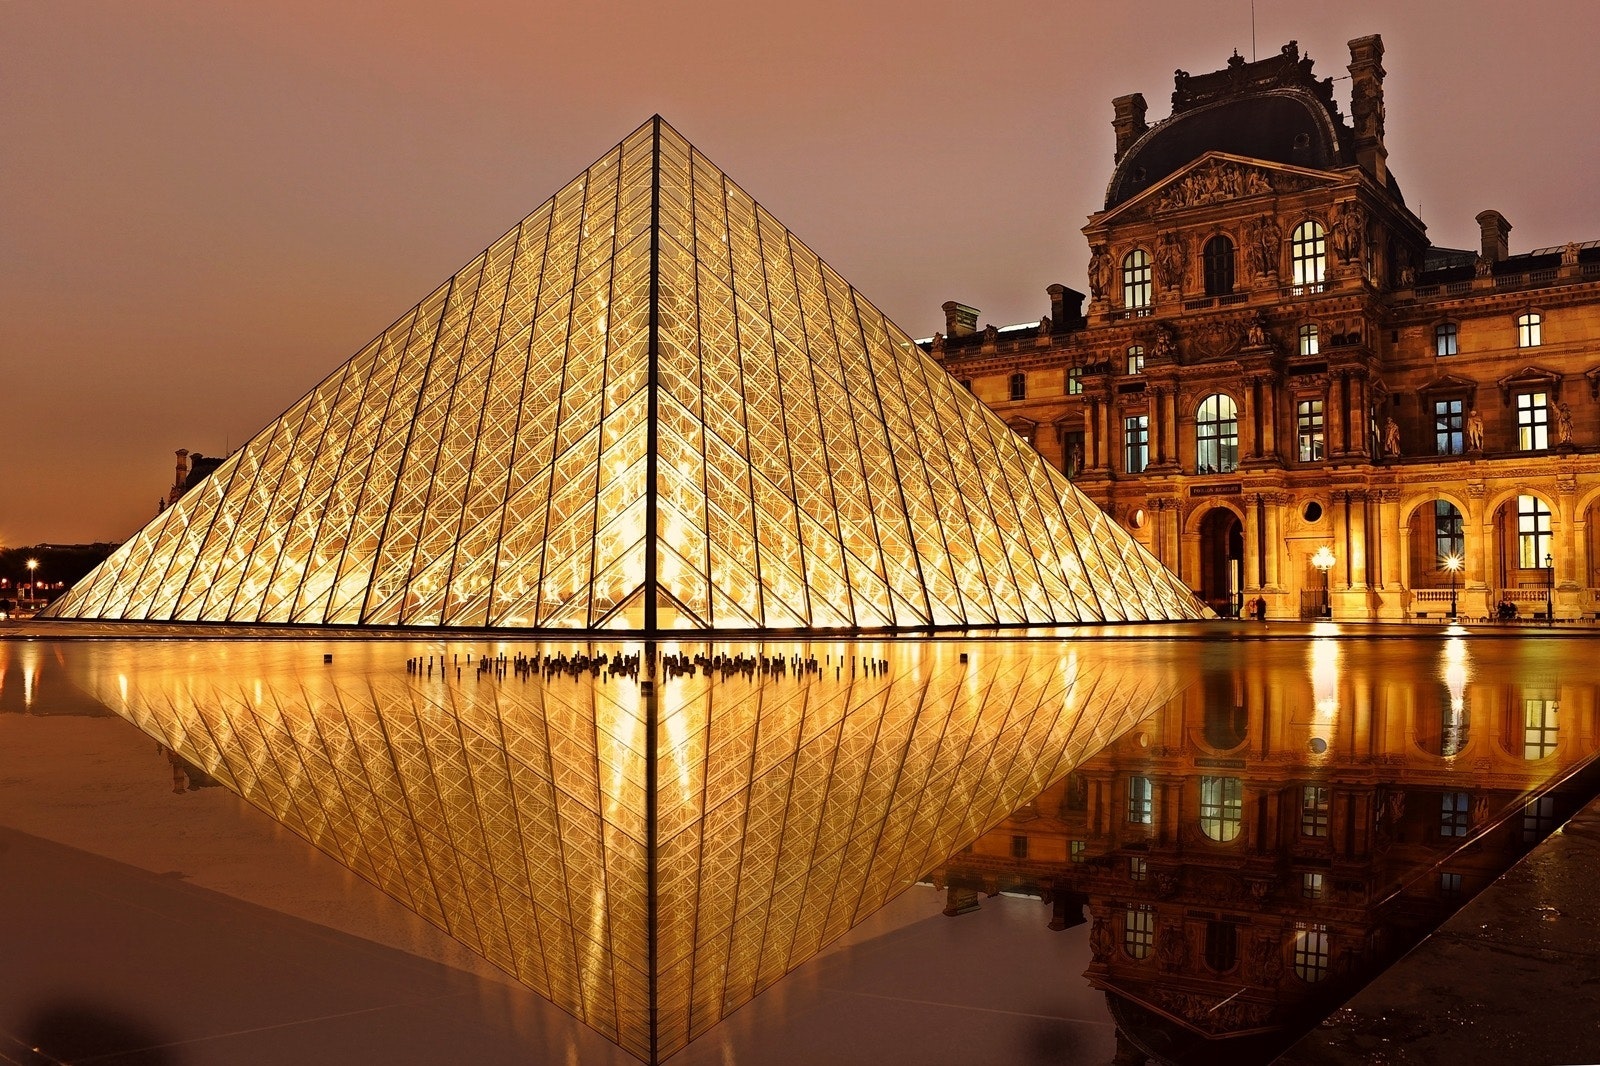 Glass pyramid of the Louvre Museum at night